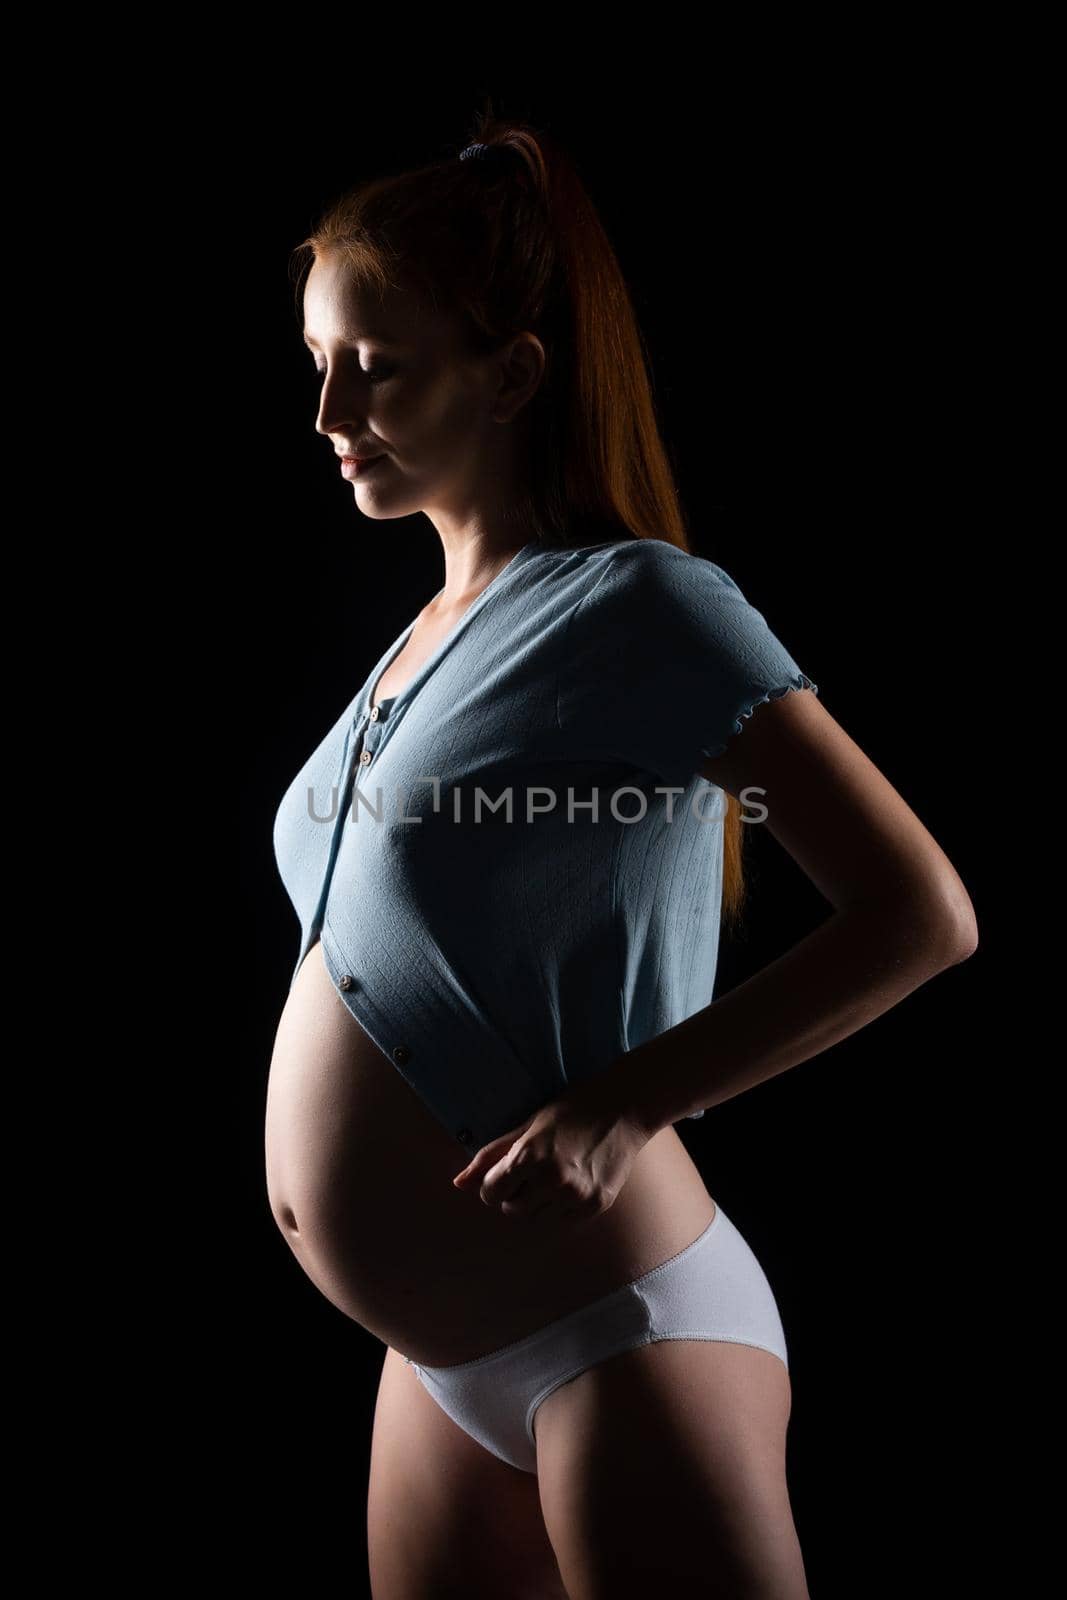 A pregnant woman with a big belly and red hair. Posing on a black background in the studio.